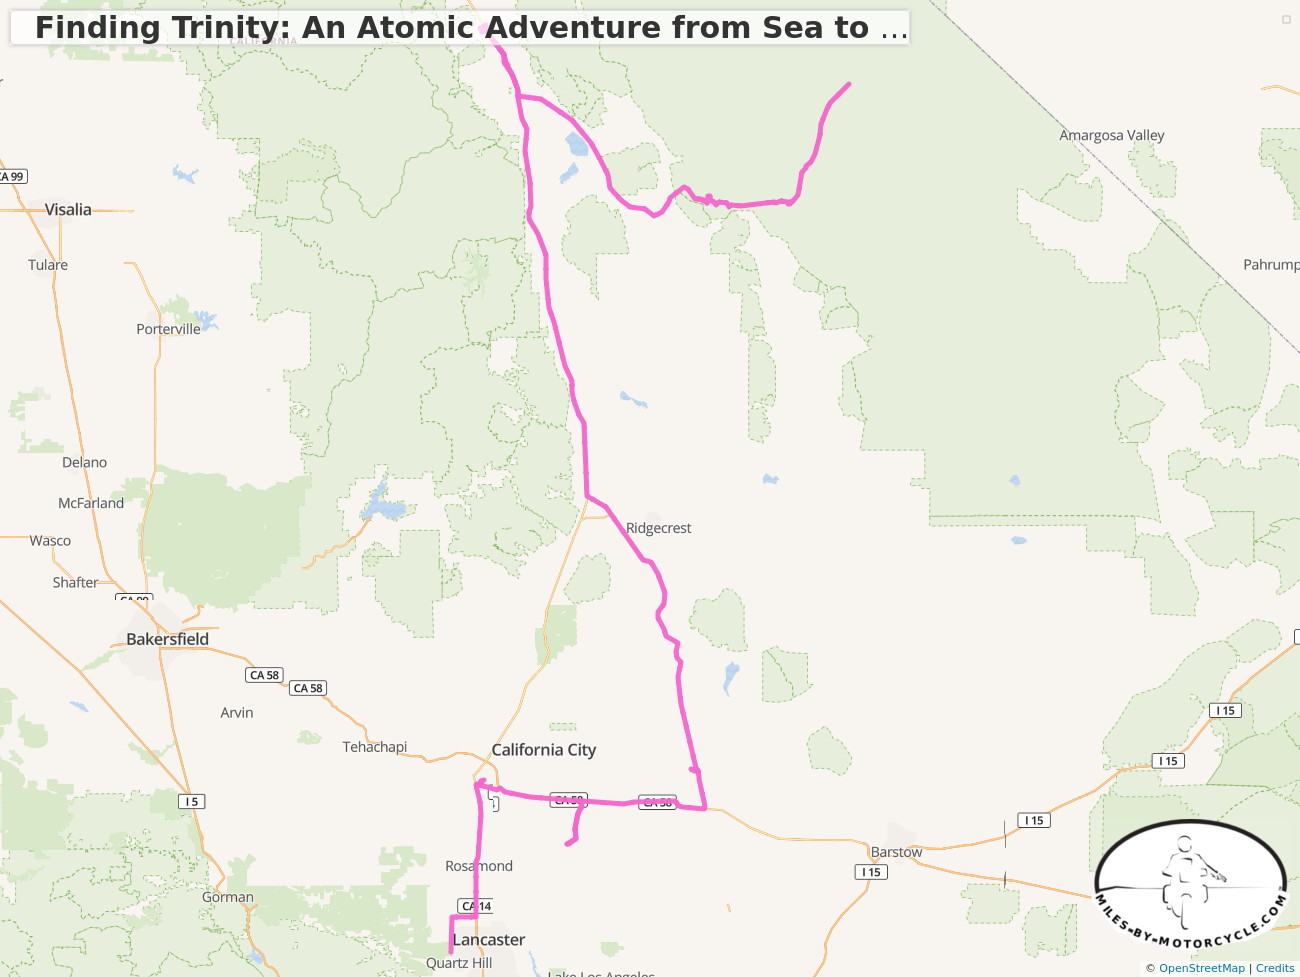 Finding Trinity: An Atomic Adventure from Sea to Glowing Sea Day 12